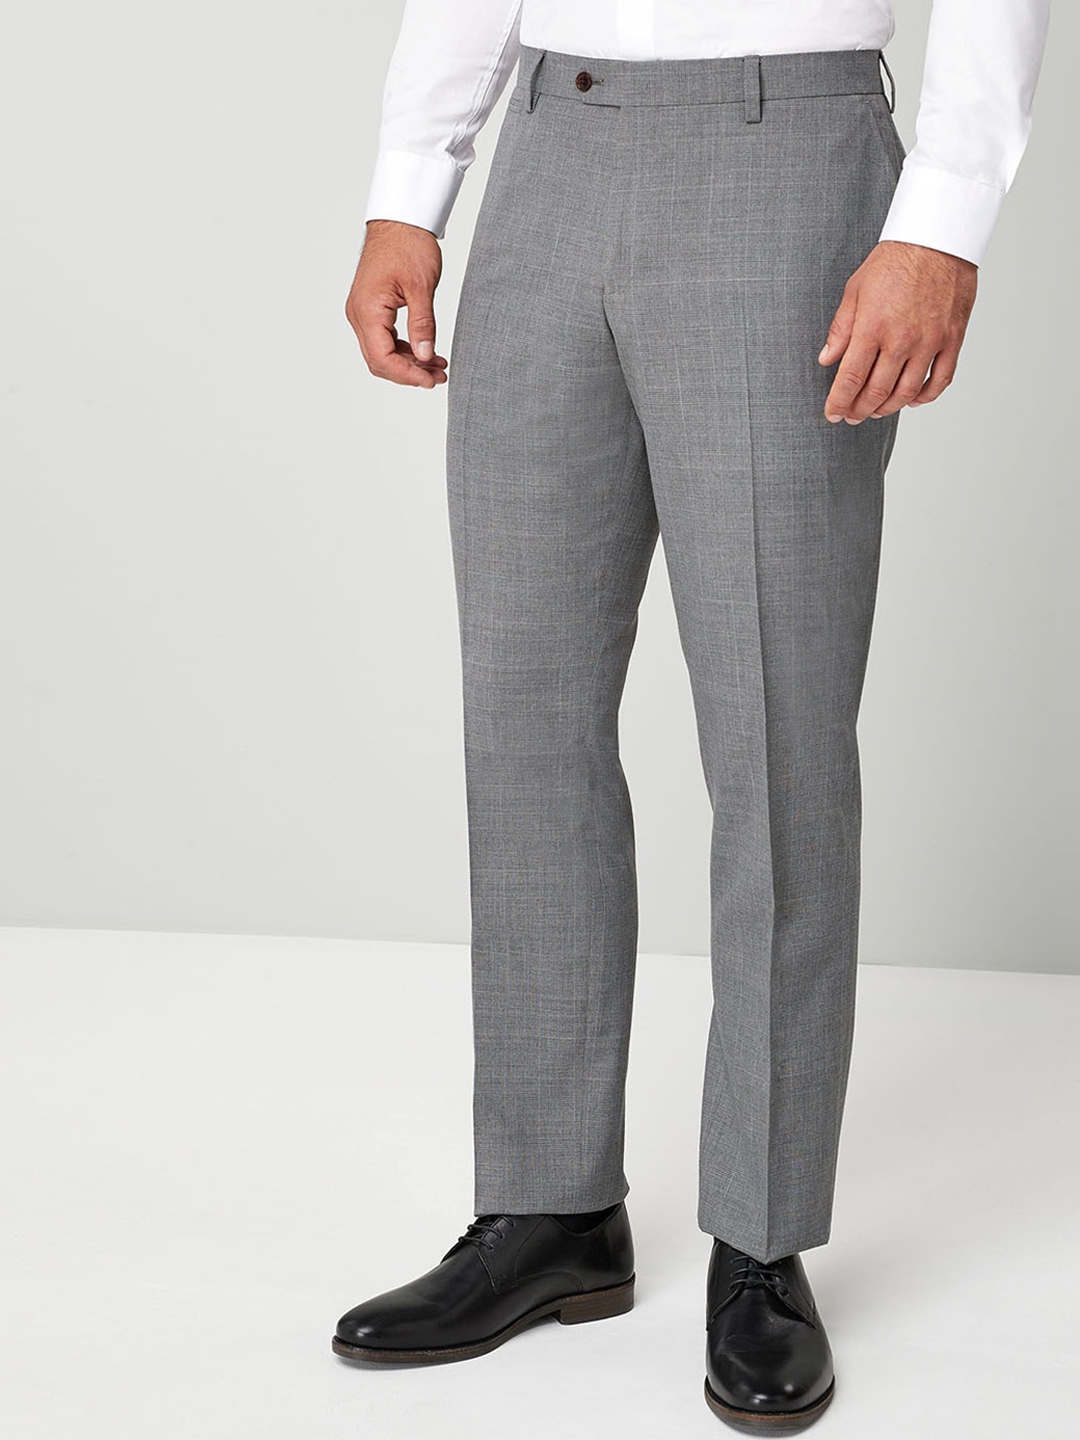 1913 Collection Cotton Linen Mens Slim Fit Italian Suit Trousers in Stone   Hawes  Curtis